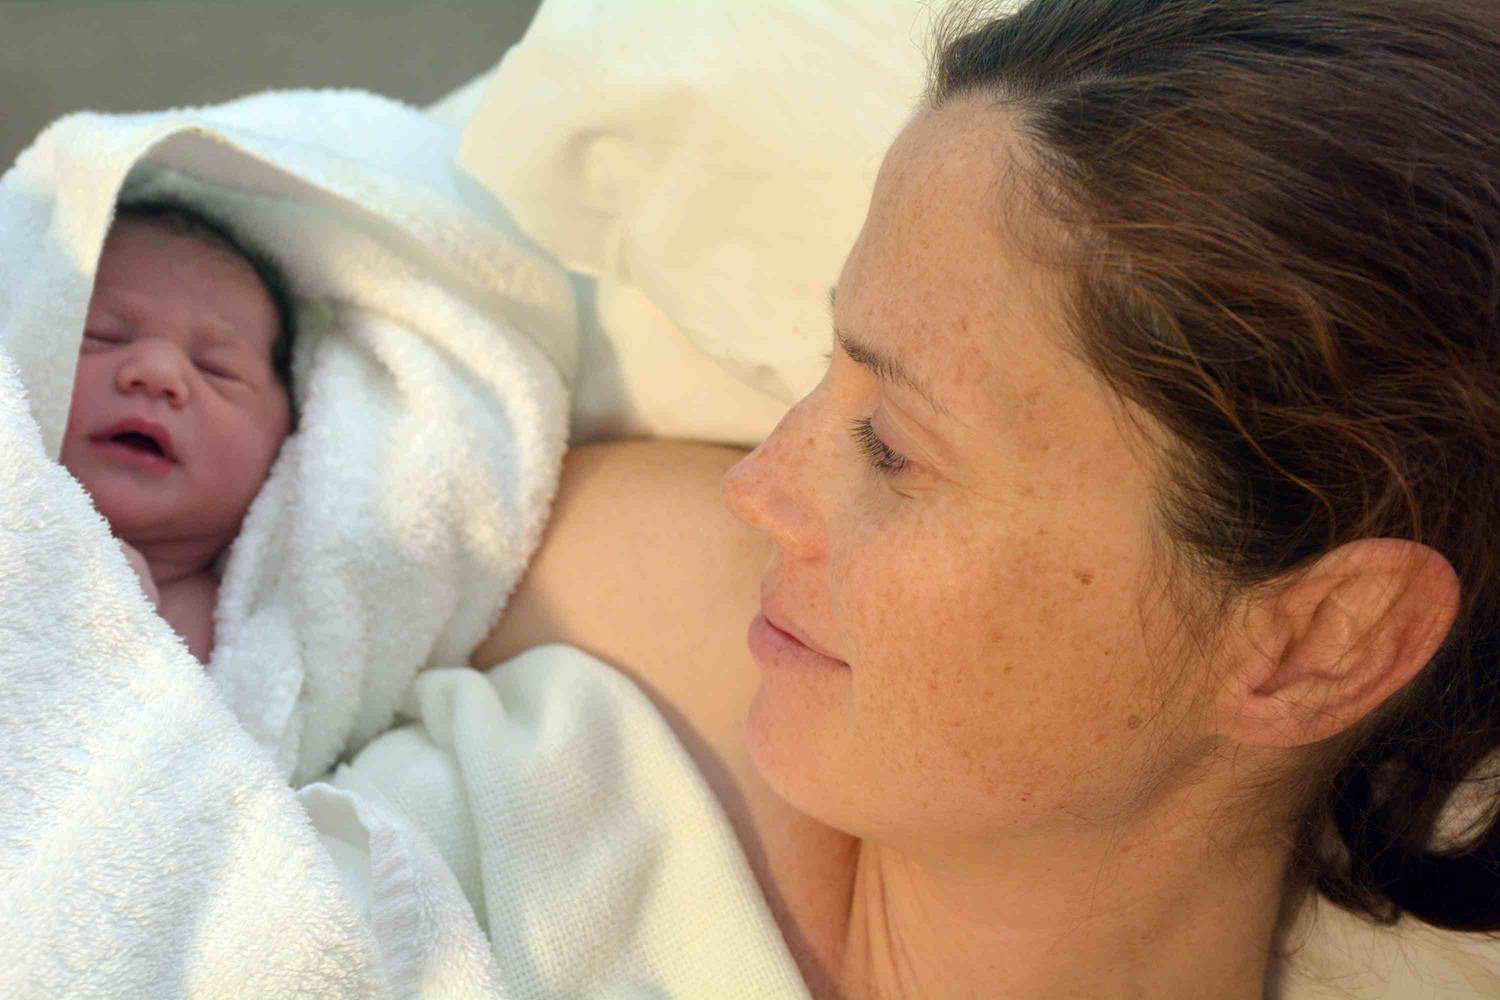 Woman with her newborn